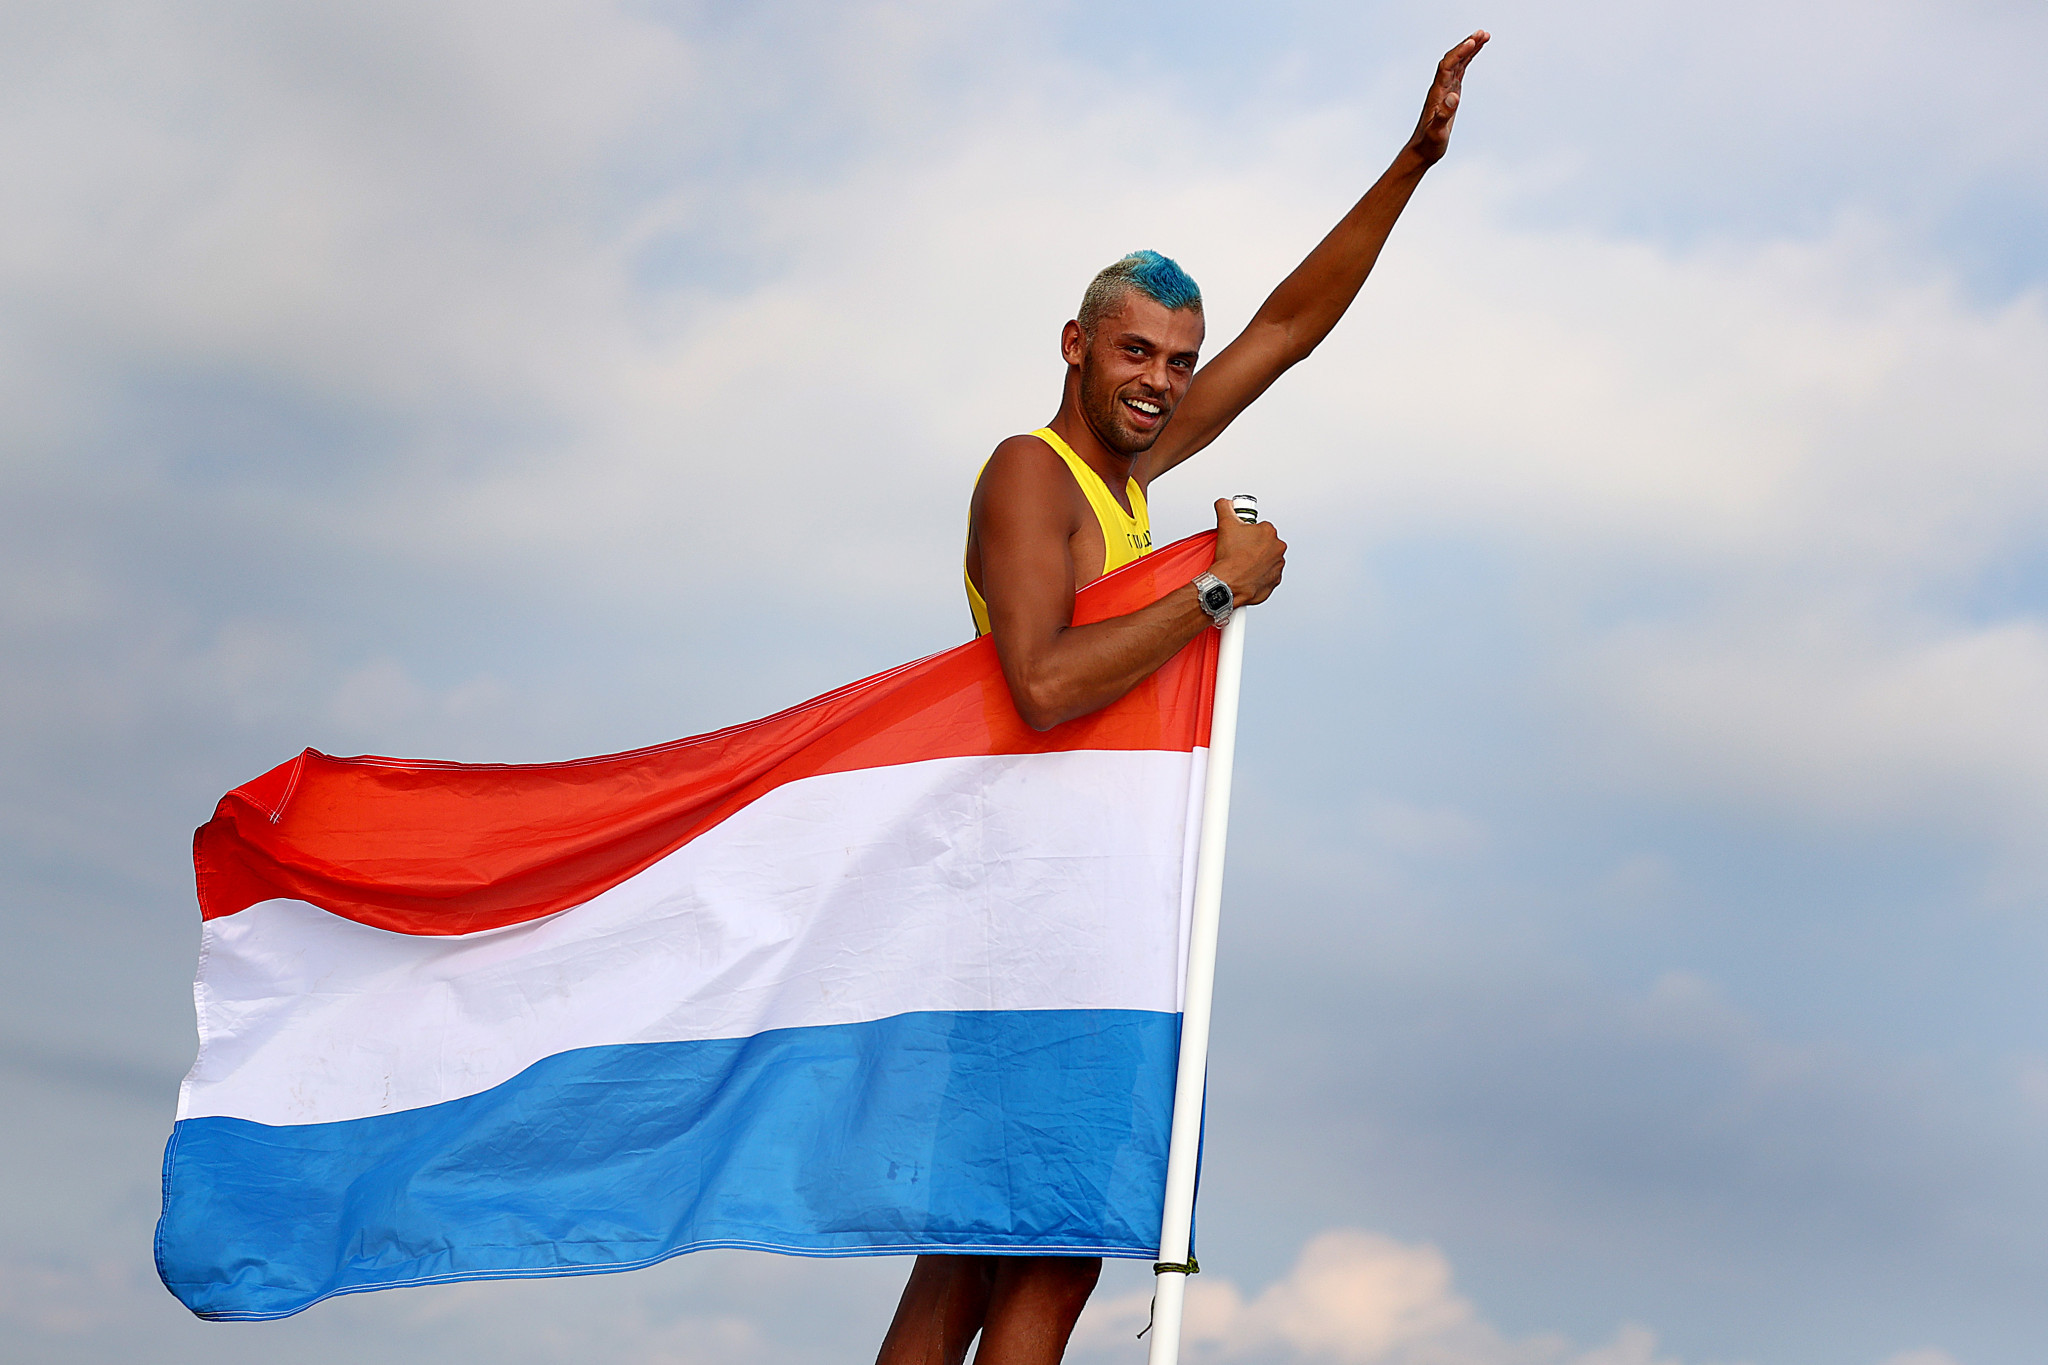 Badloe wins men's RS:X windsurfing title at Tokyo 2020 to maintain Dutch domination